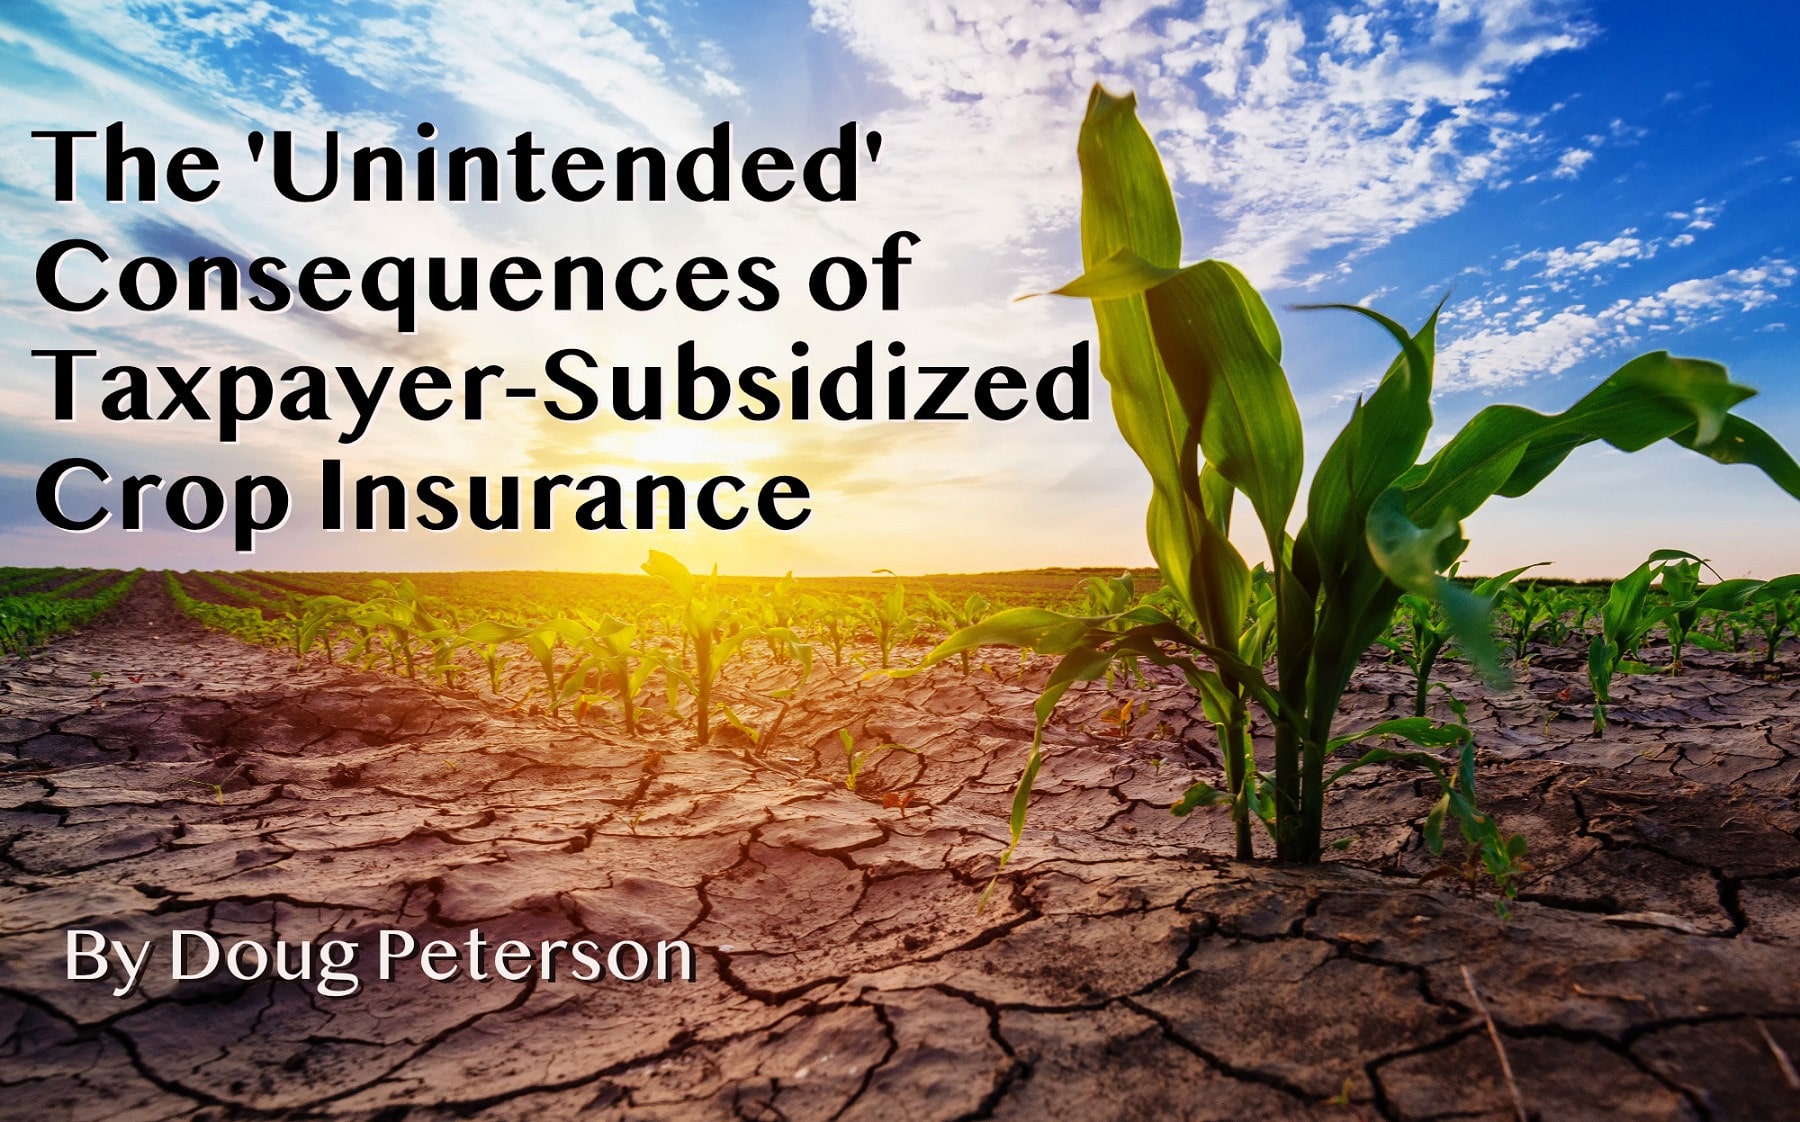 The ‘Unintended’ Consequences of Taxpayer-Subsidized Crop Insurance